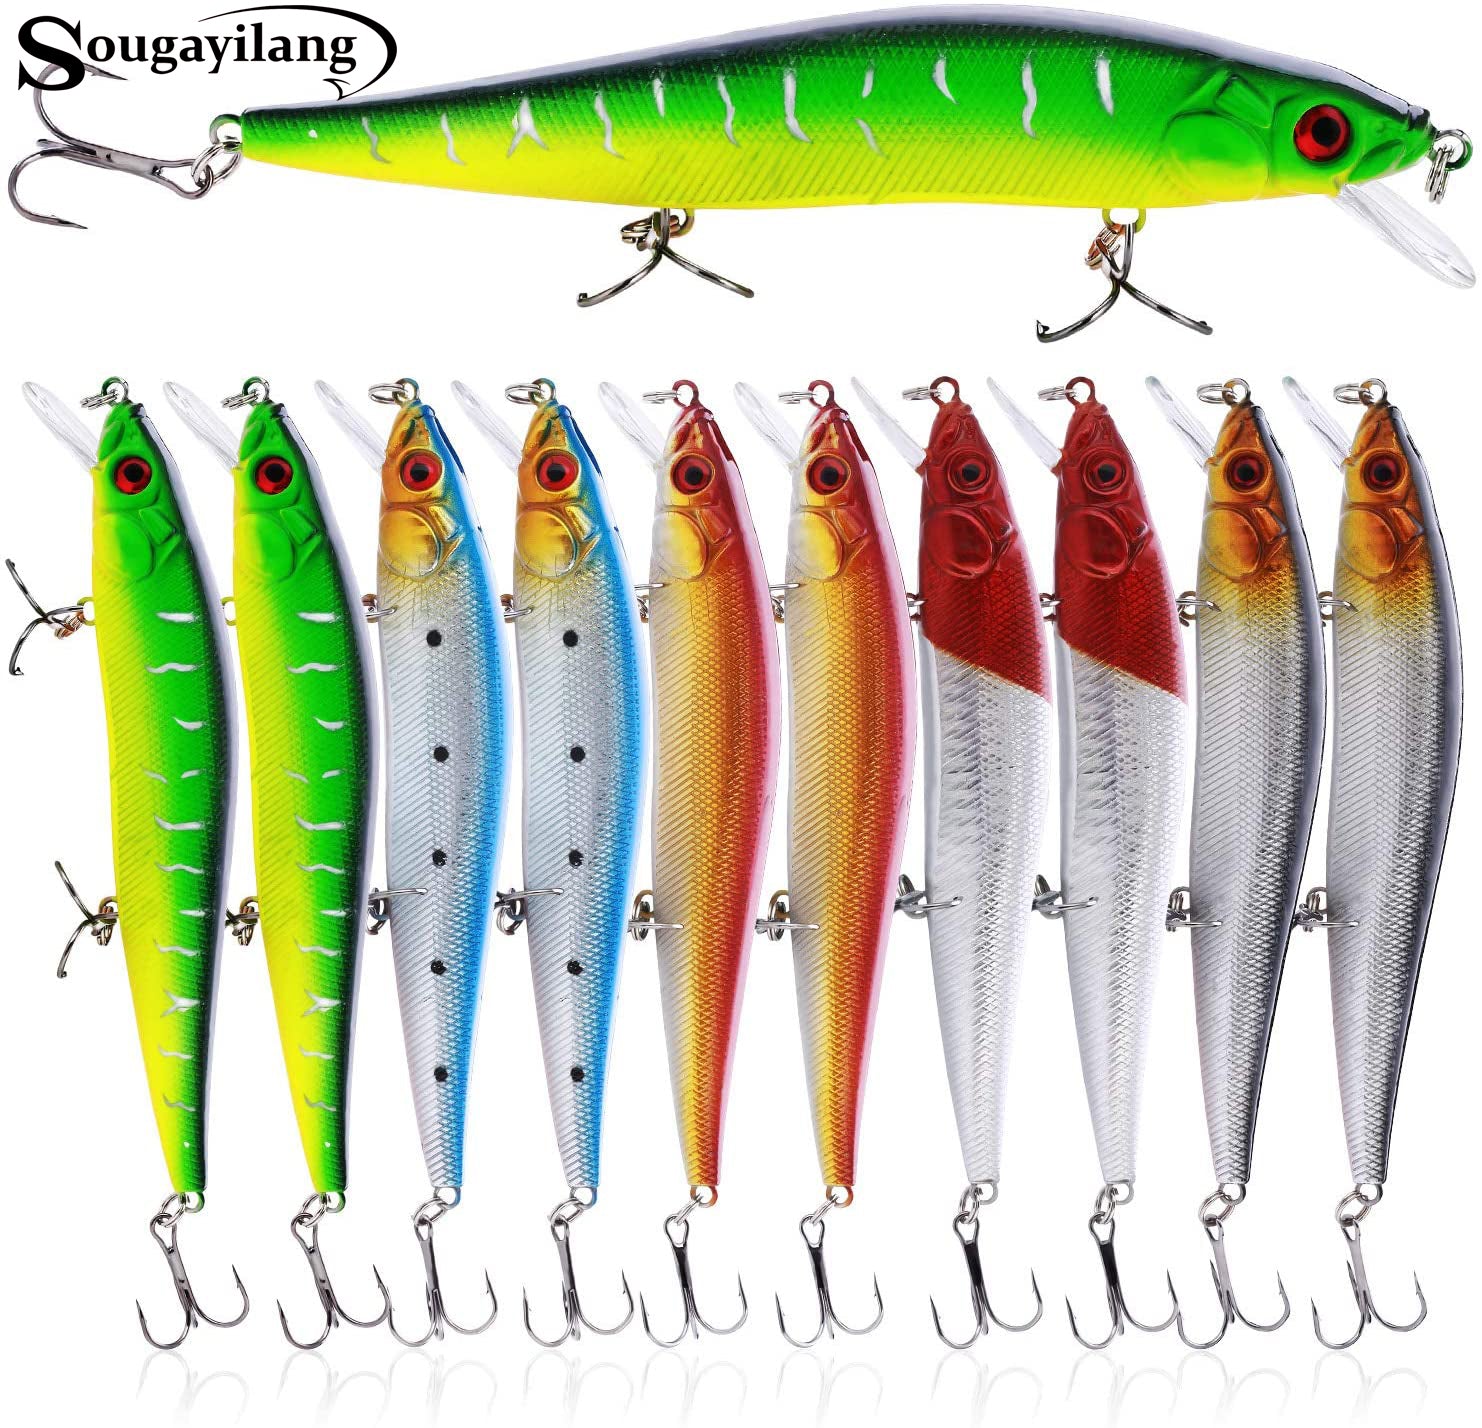 Fishing Lures Hard Bait Minnow VIB Lures with Treble Hook Life-Like  Swimbait Fishing Bait Popper Crankbait Vibe Sinking Lure for Bass Trout  Walleye